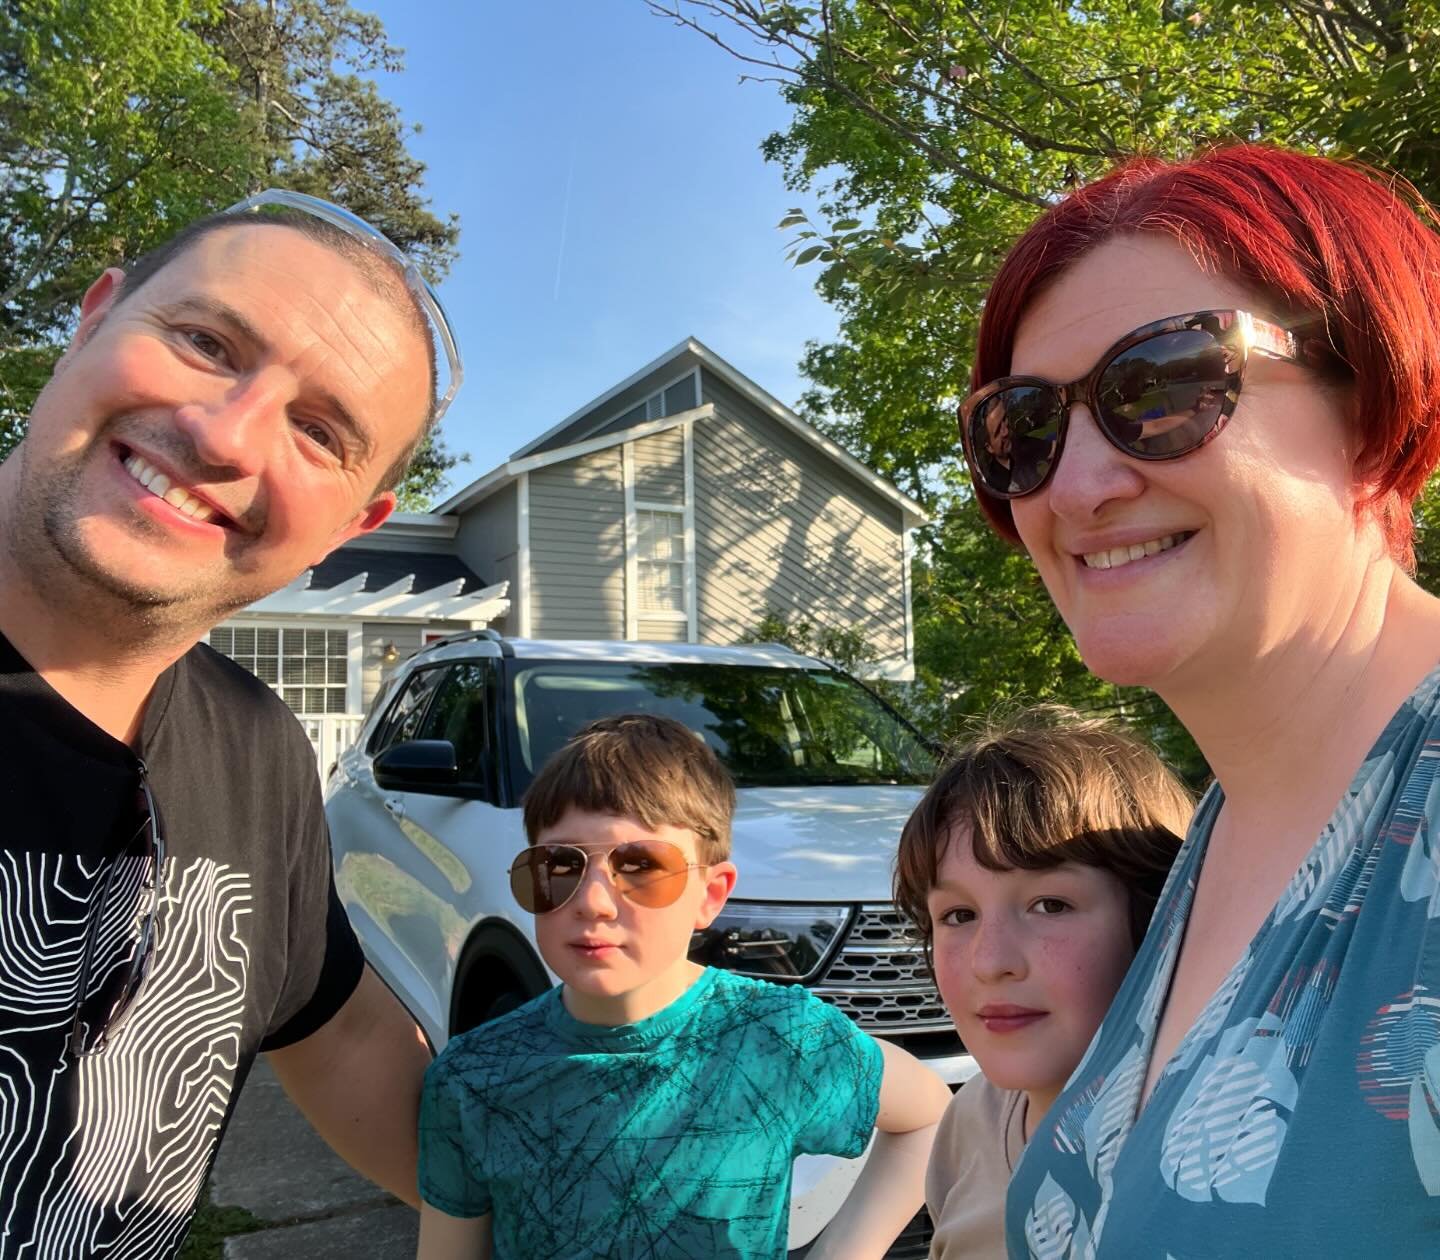 Back in ATL, this time with the family!
Loving the hip neighbourhoods. Less keen on 14 lane highways, but it&rsquo;s so much easier with Siri!

Time for vacation!